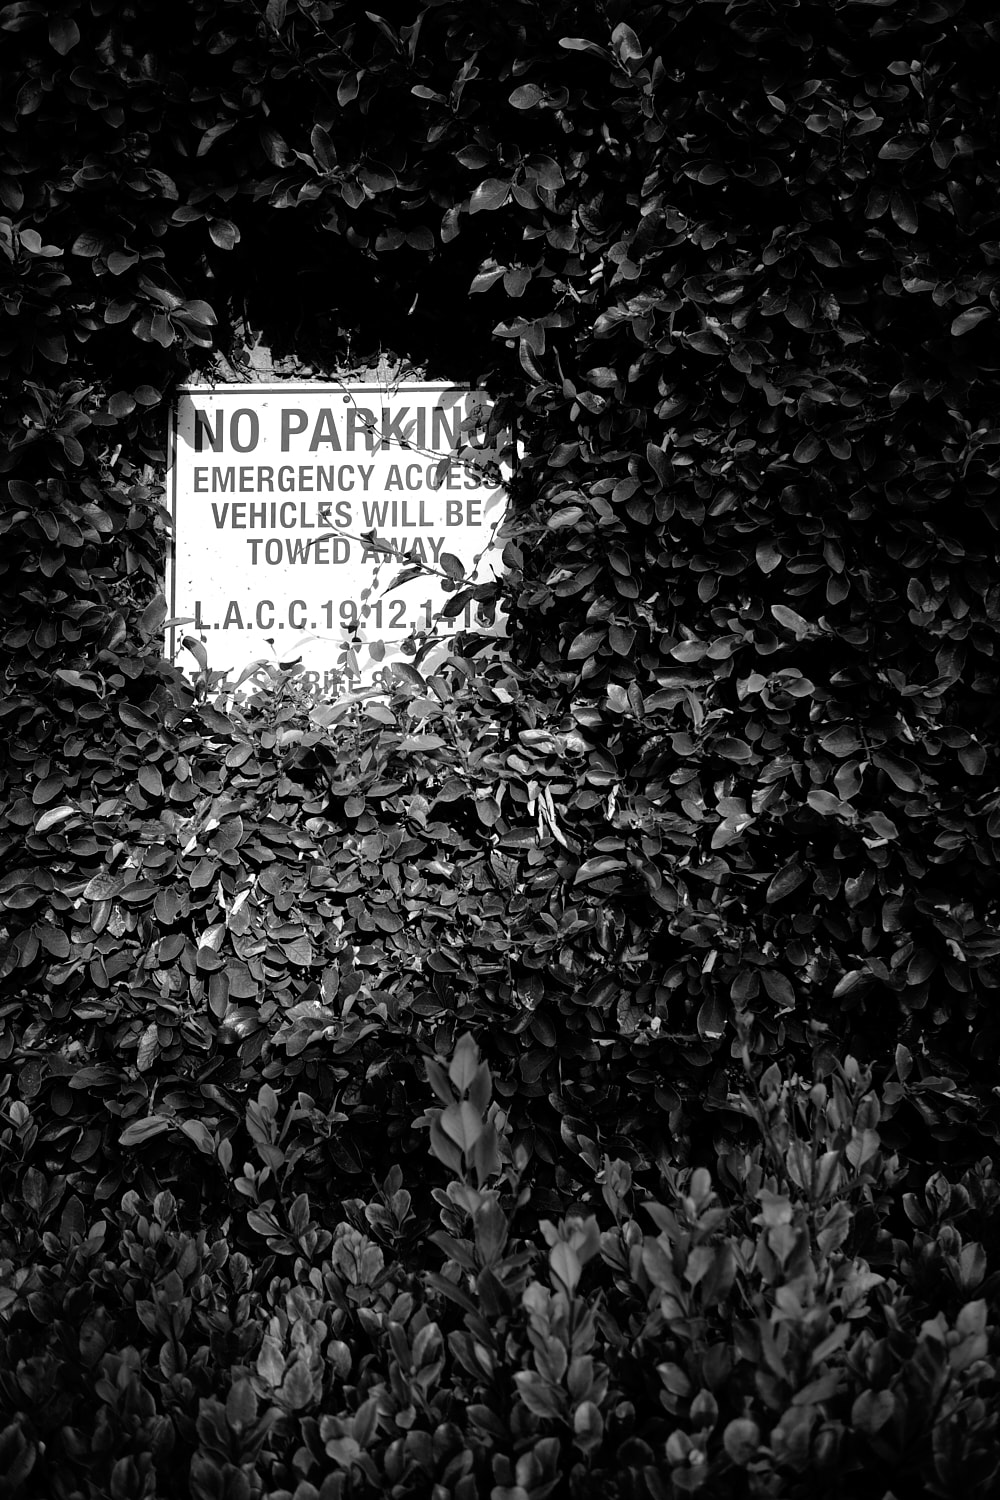 Black and white portrait photo of a wall of ivy almost covering a No Parking sign.